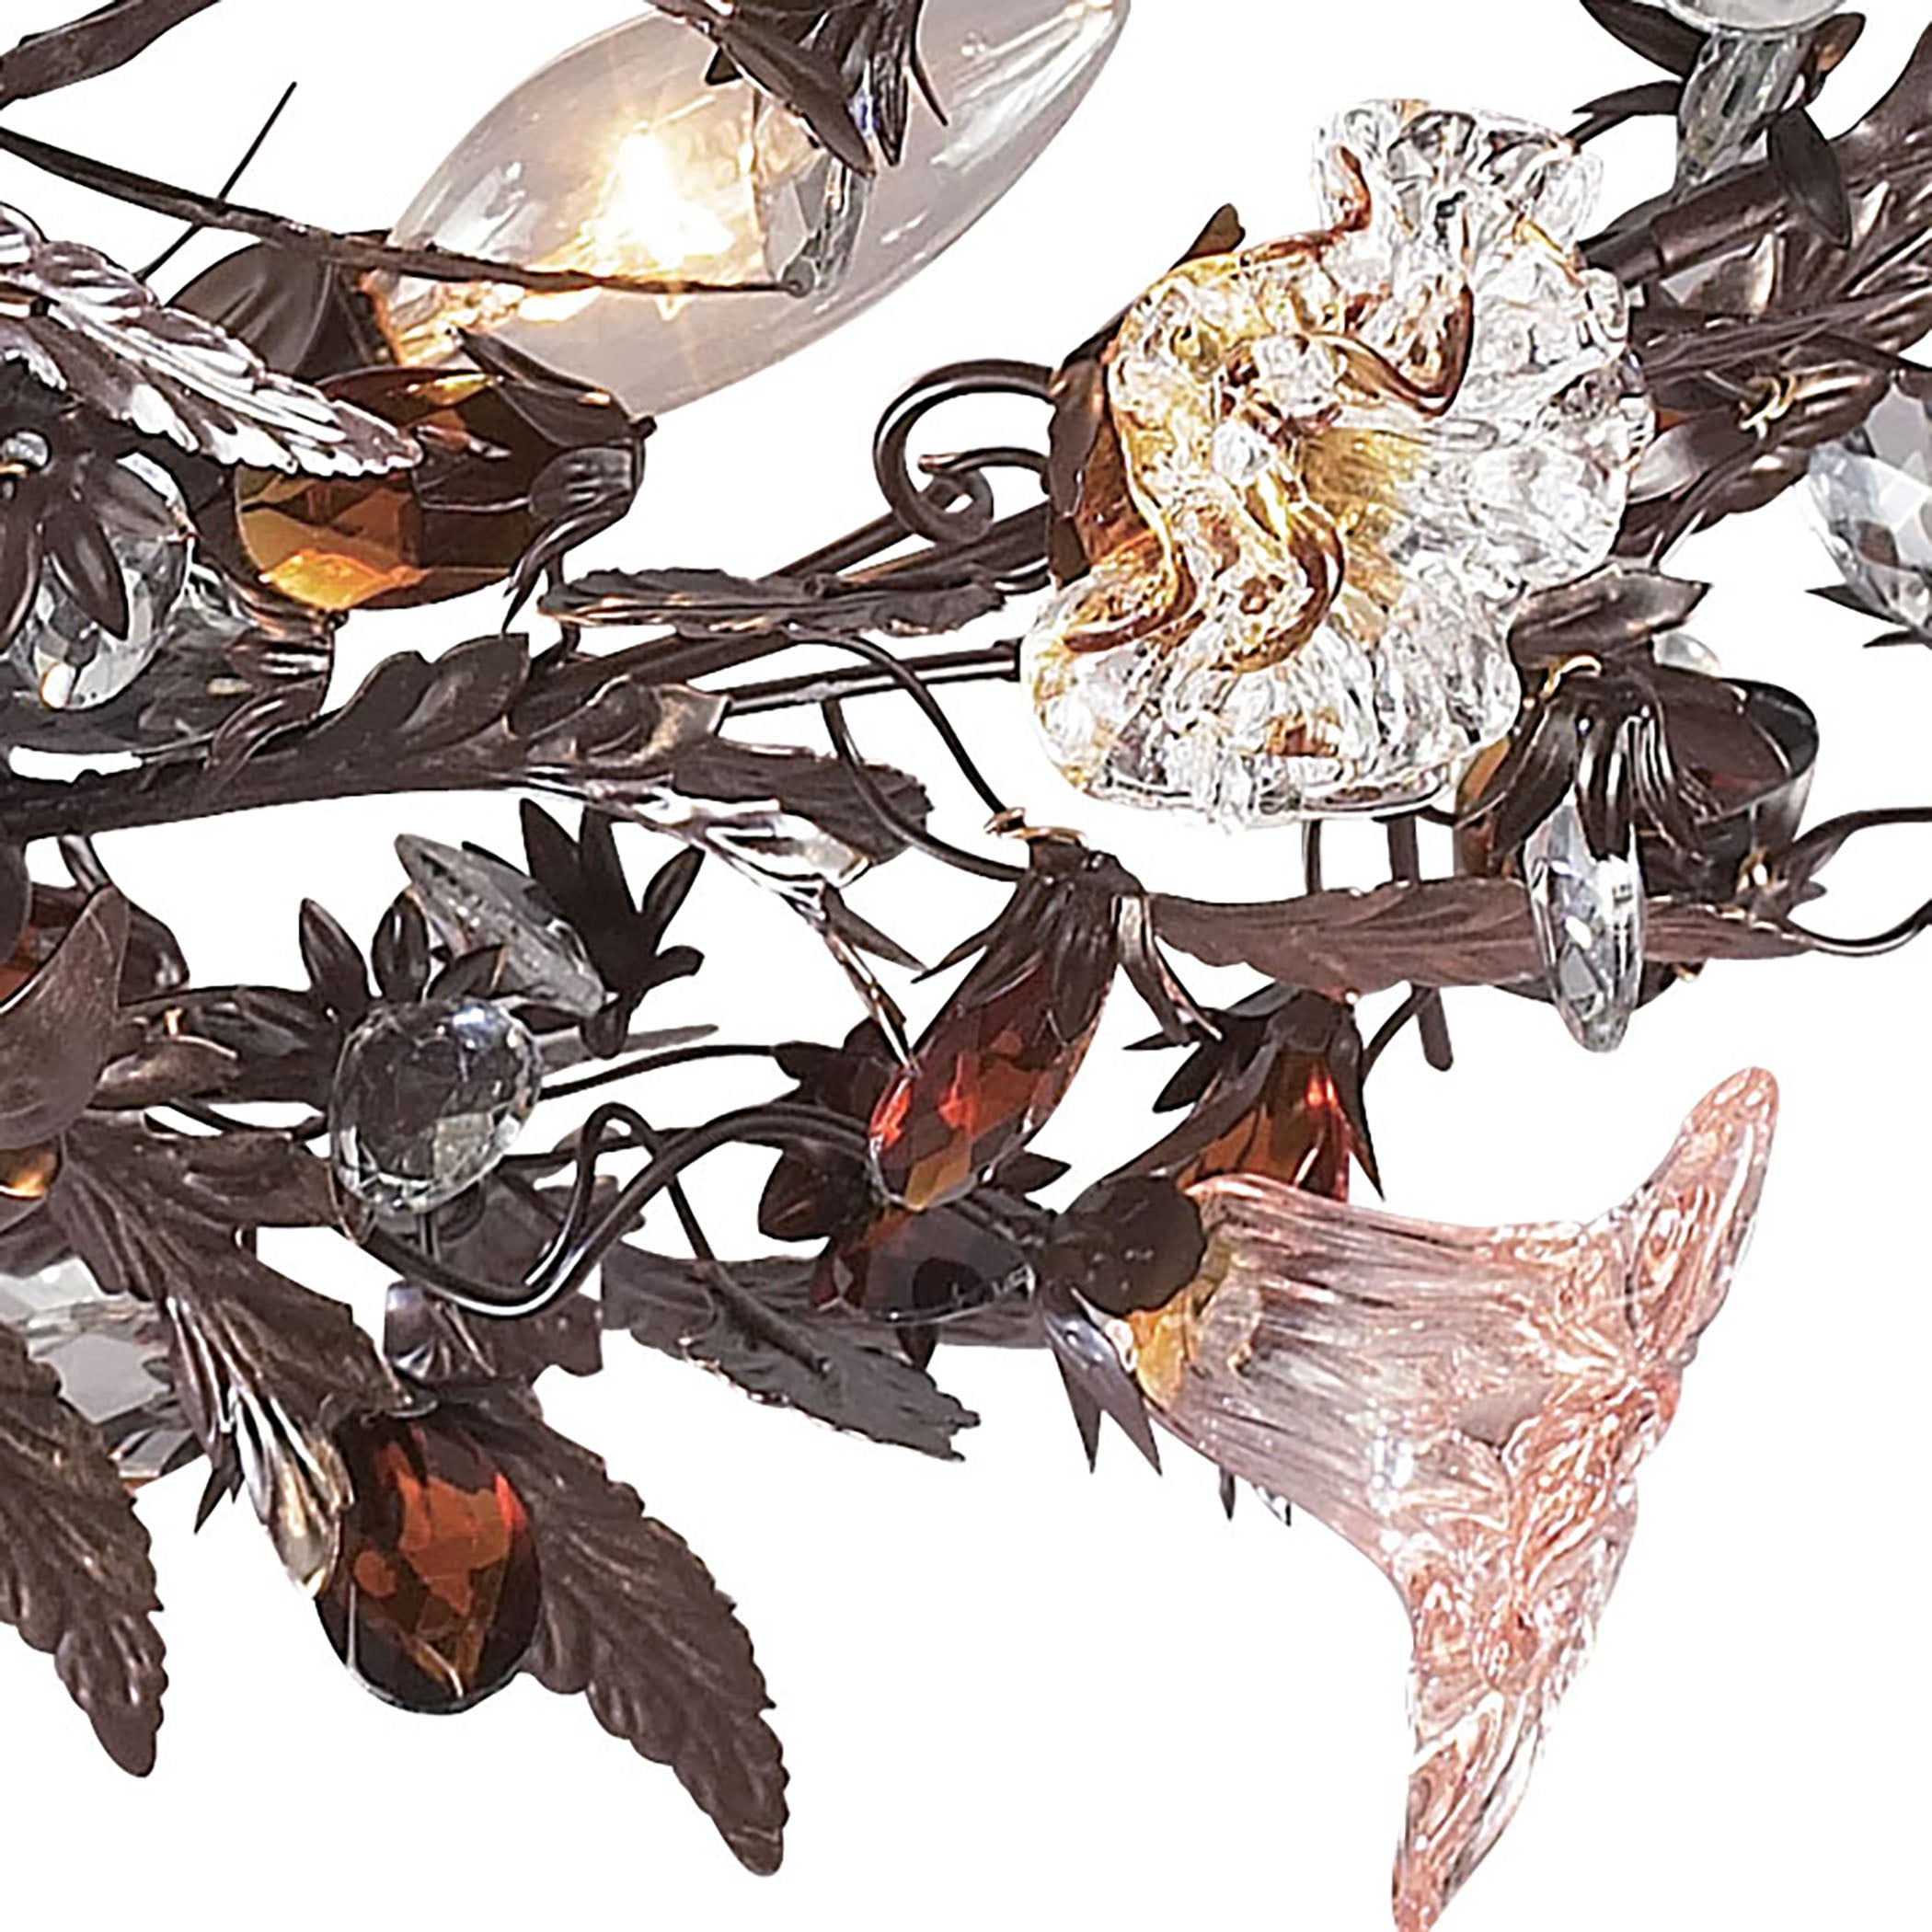 ELK Lighting 7046/3 Cristallo Fiore 3-Light Semi Flush in Deep Rust with Clear and Amber Florets